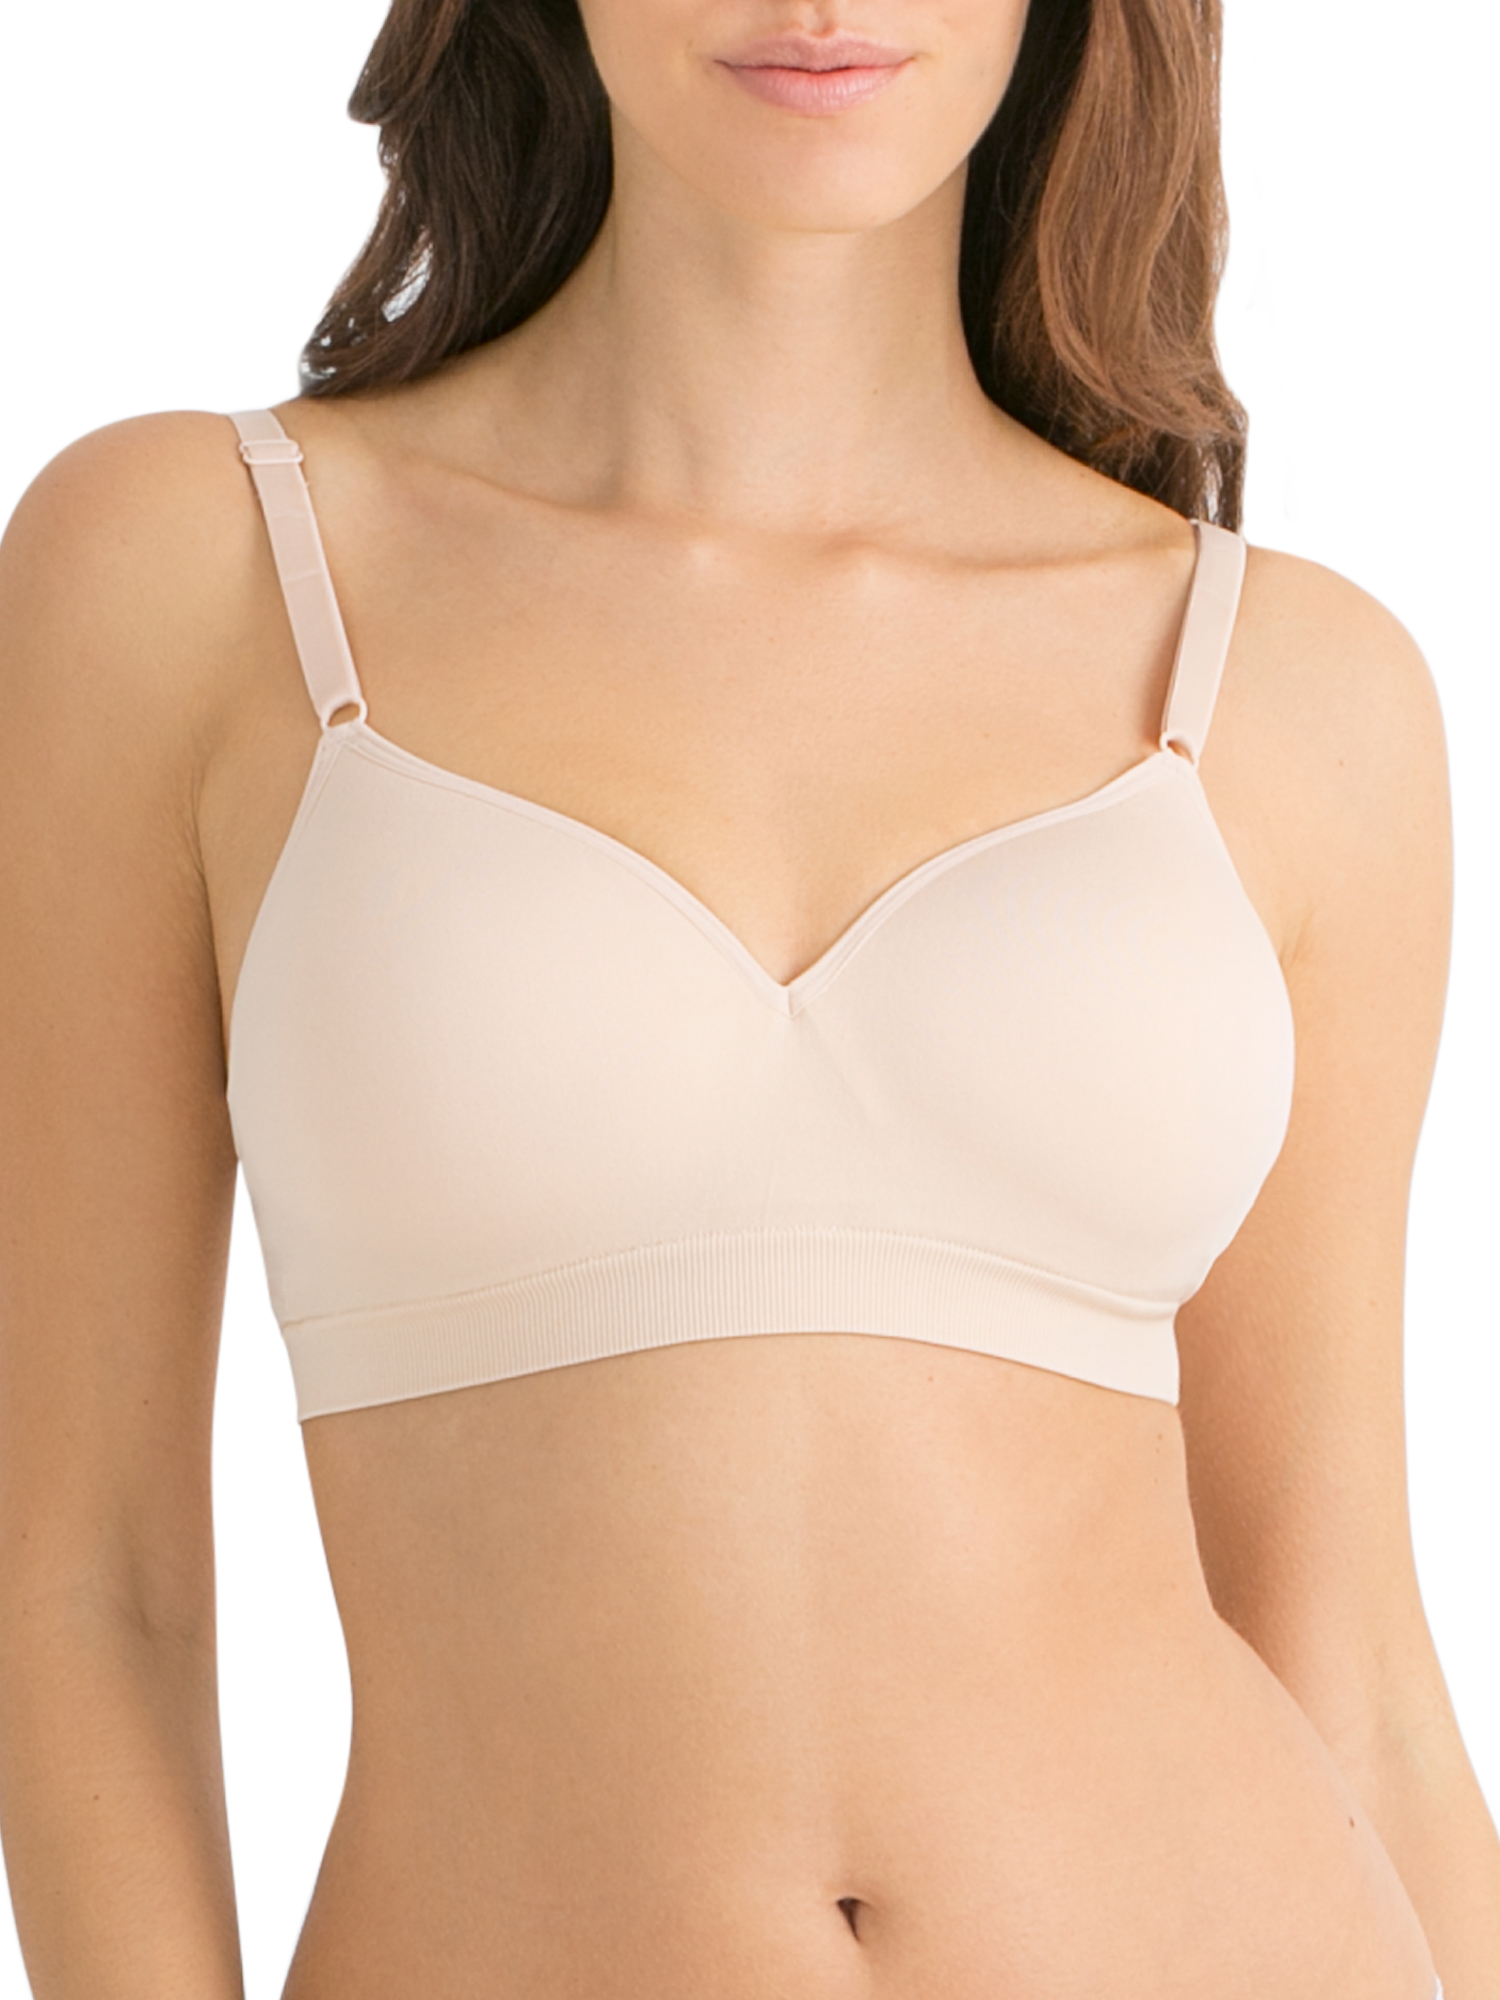 Fruit of the Loom Women's Seamless Wire Free Lift Bra, Style FT640 - image 1 of 2